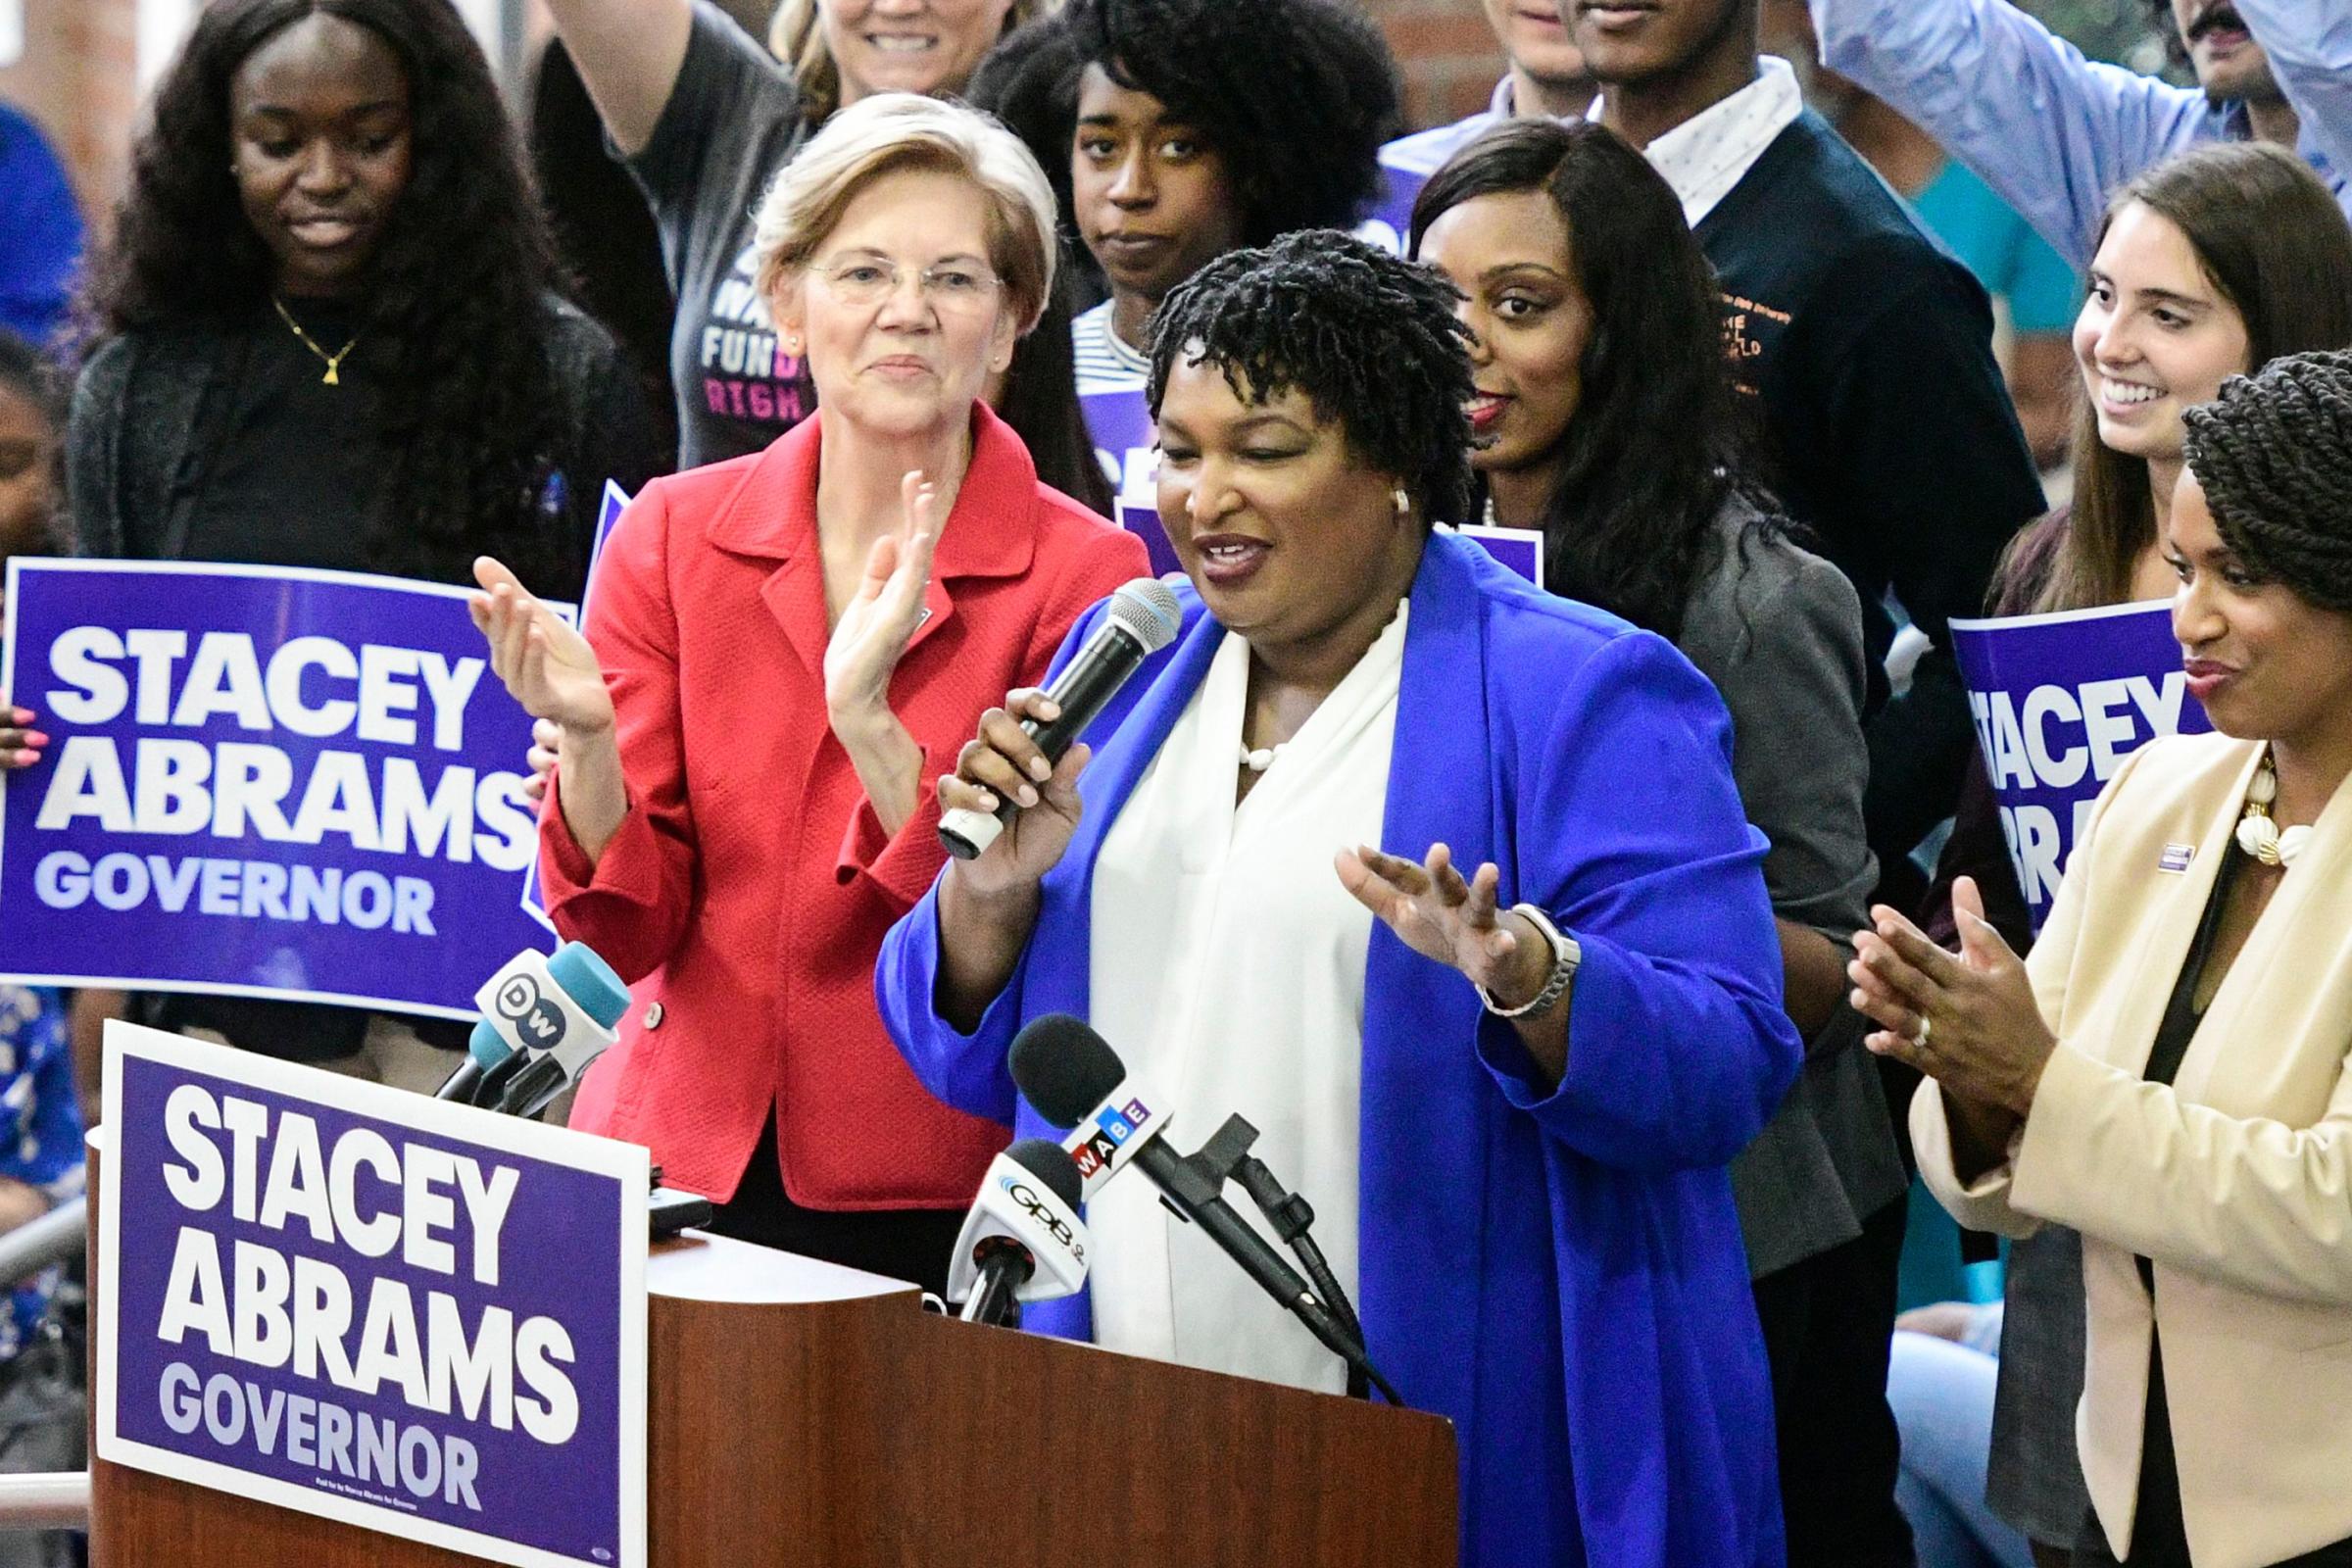 Democratic Georgia gubernatorial nominee Stacey Abrams (C) speaks to supporters while flanked by Boston City Council woman Ayanna Pressley (R) and Democratic Senator from Massachusetts Elizabeth Warren during a campaign rally in Morrow, Georgia, USA, October 9, 2018.